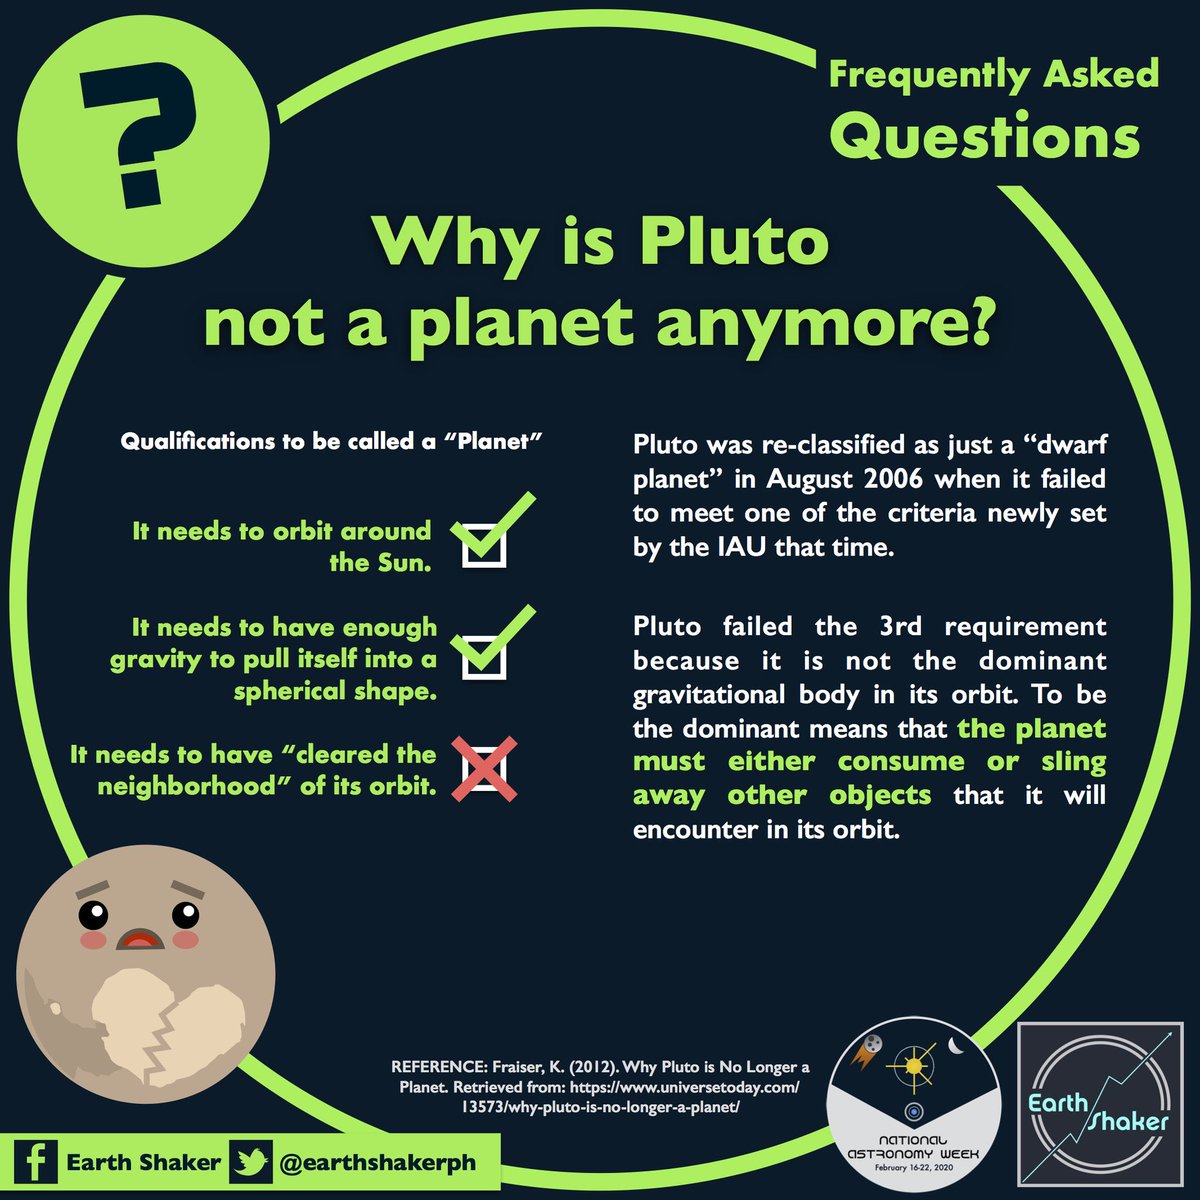 to be bigger than Pluto. This put a large question into the minds of scientists at the time: Should Eris be a planet as well? What about all the other Kuiper Belt objects? The line for what was considered a “planet” was blurred. (6)